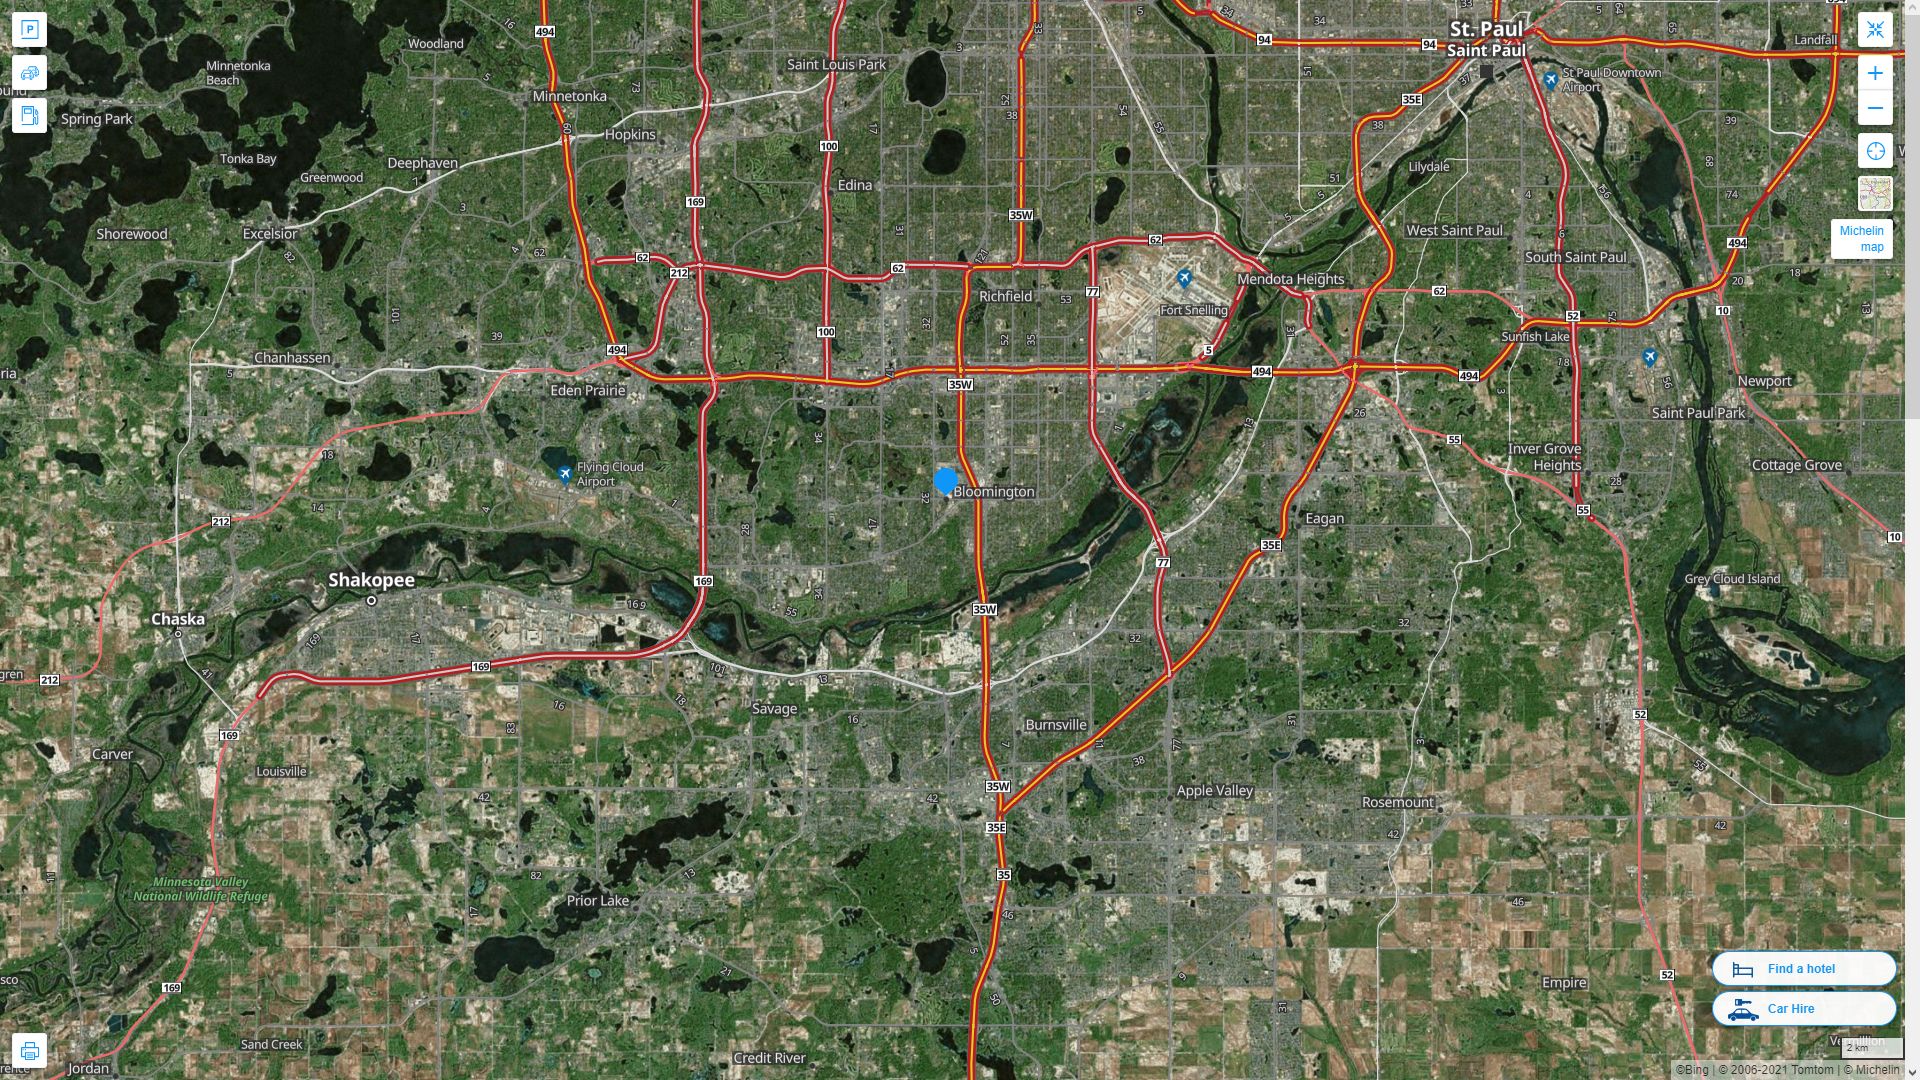 Bloomington Minnesota Highway and Road Map with Satellite View